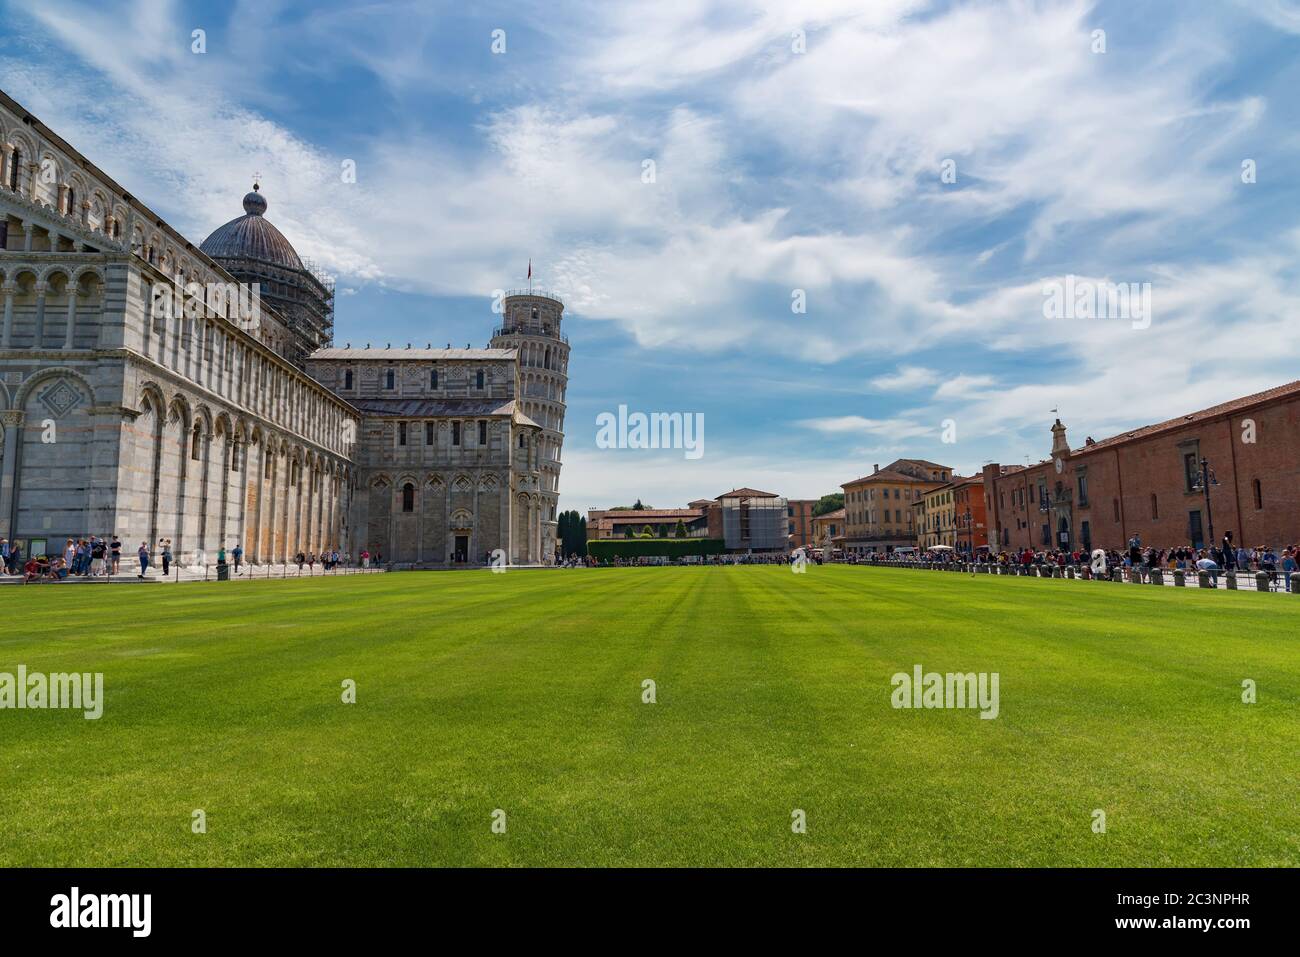 Stunning daily view at the Pisa Baptistery, the Pisa Cathedral and the Tower of Pisa. They are located in the Piazza dei Miracoli Square of Miracles Stock Photo